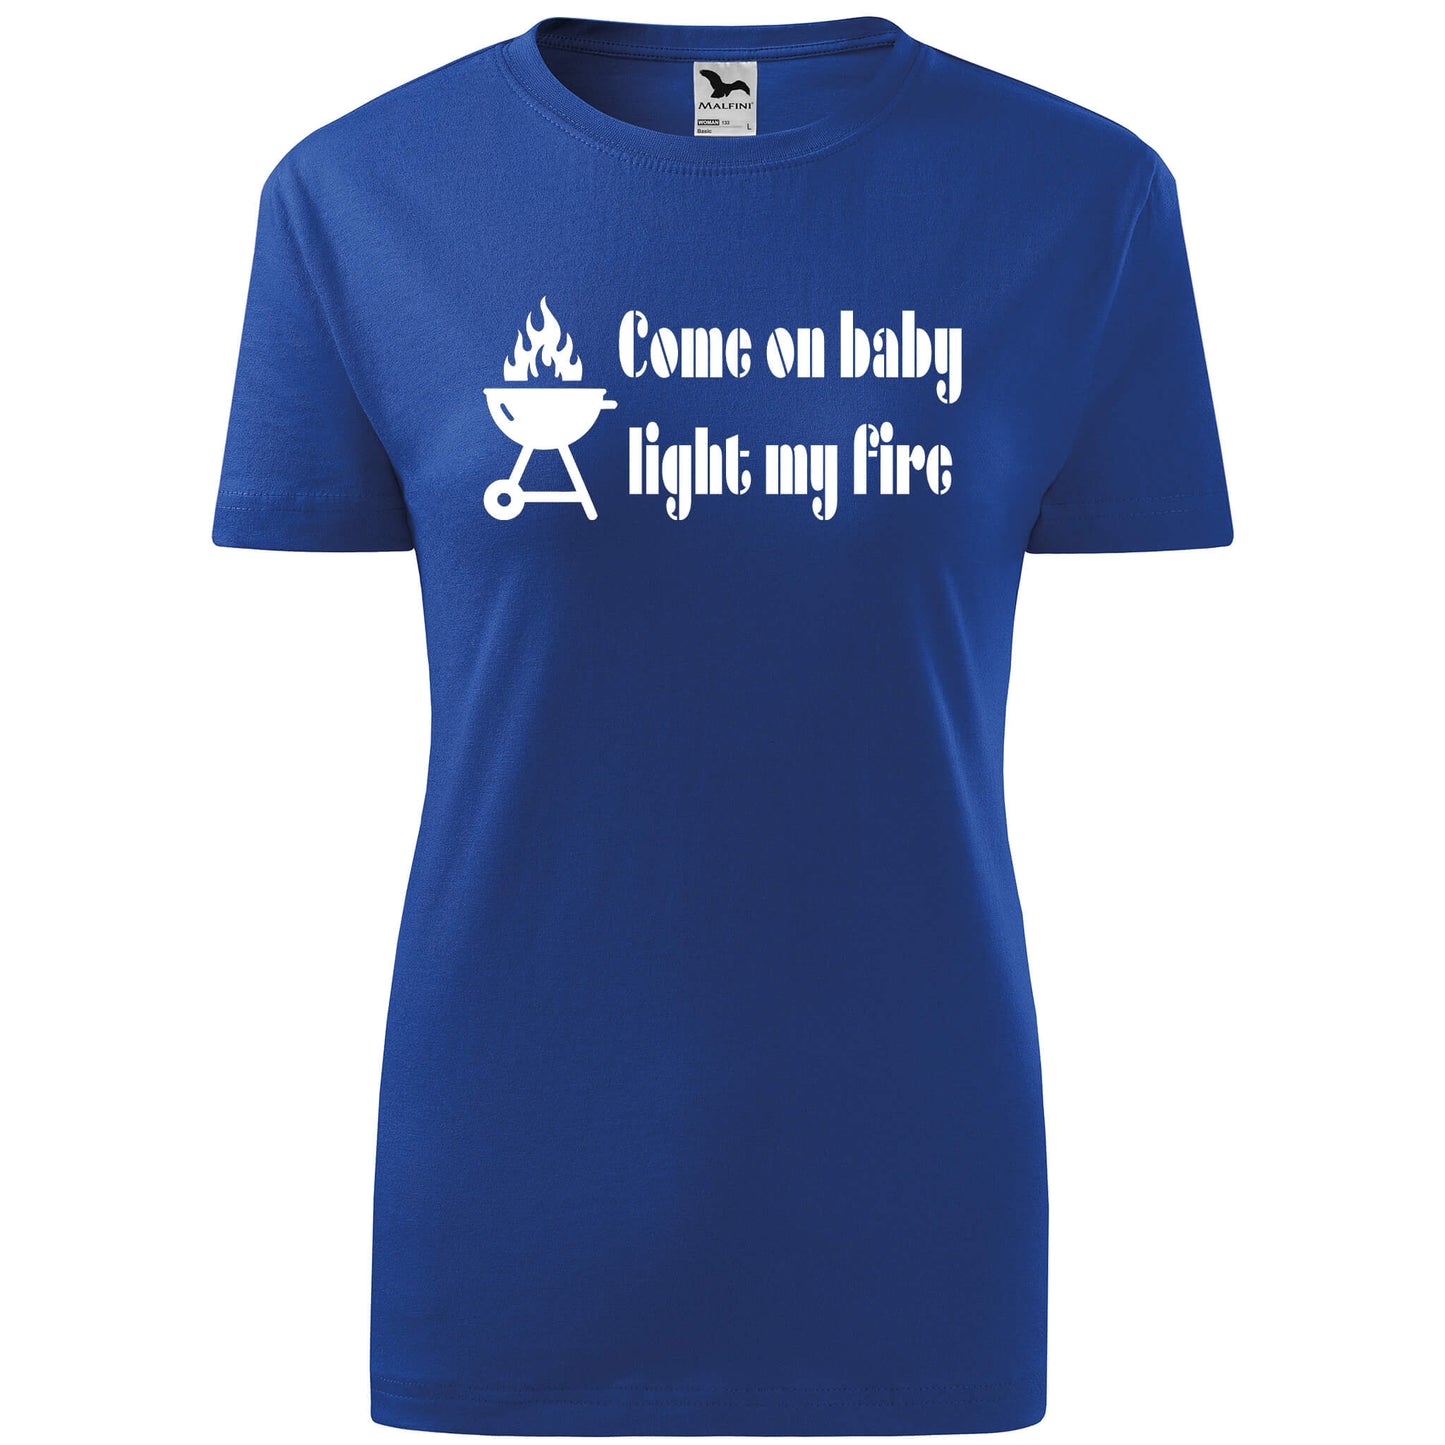 T-shirt - Come on baby light my fire - rvdesignprint